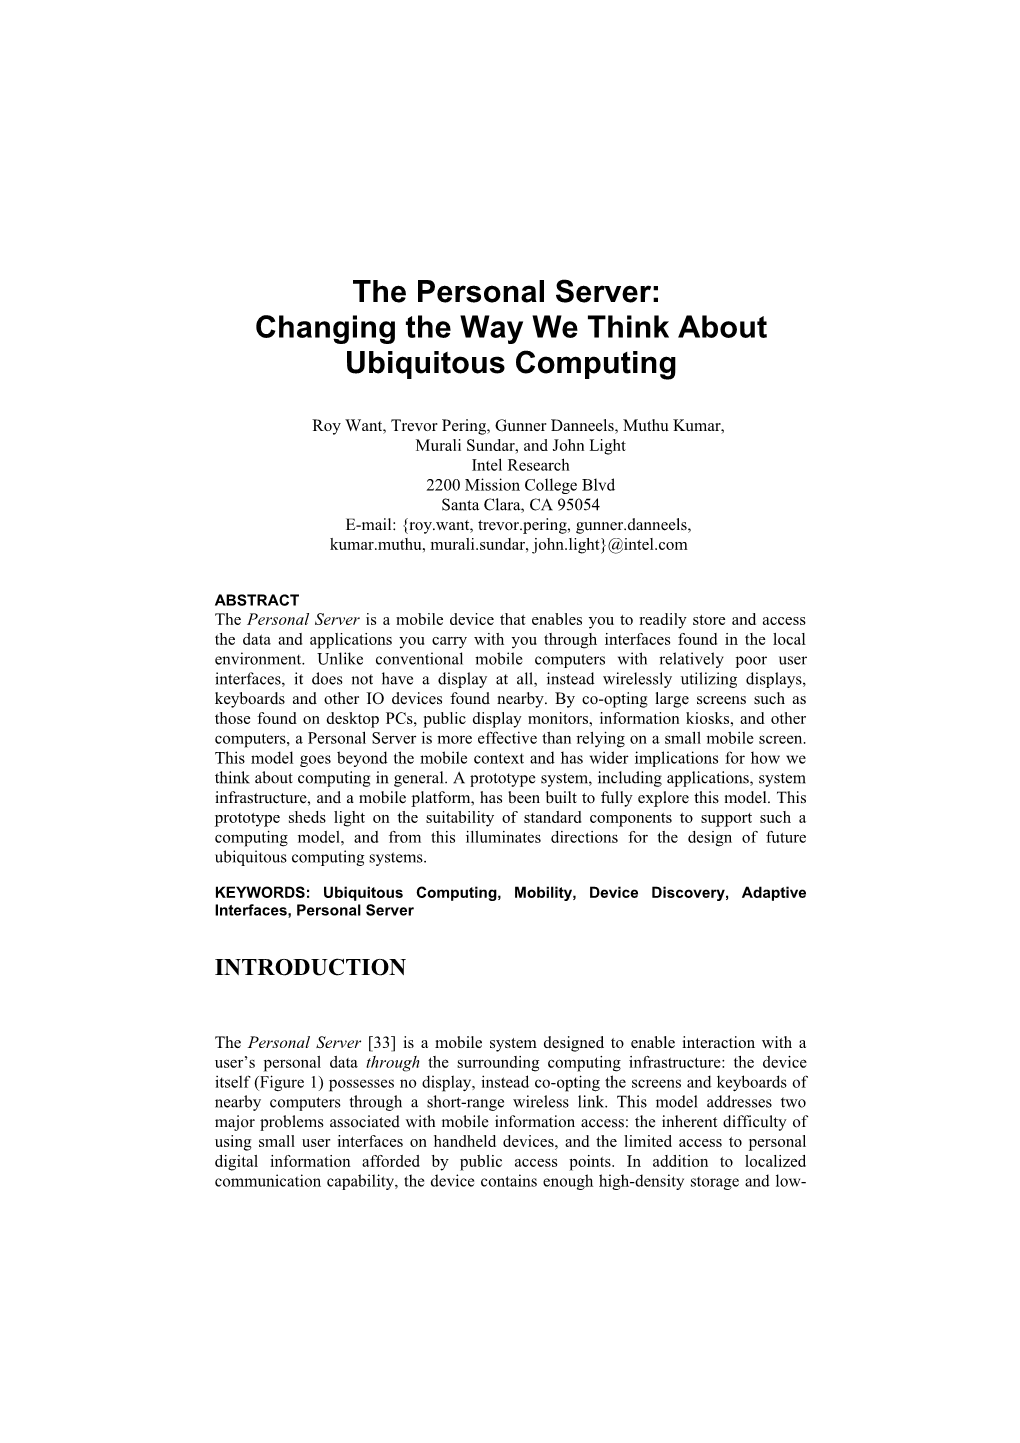 The Personal Server: Changing the Way We Think About Ubiquitous Computing